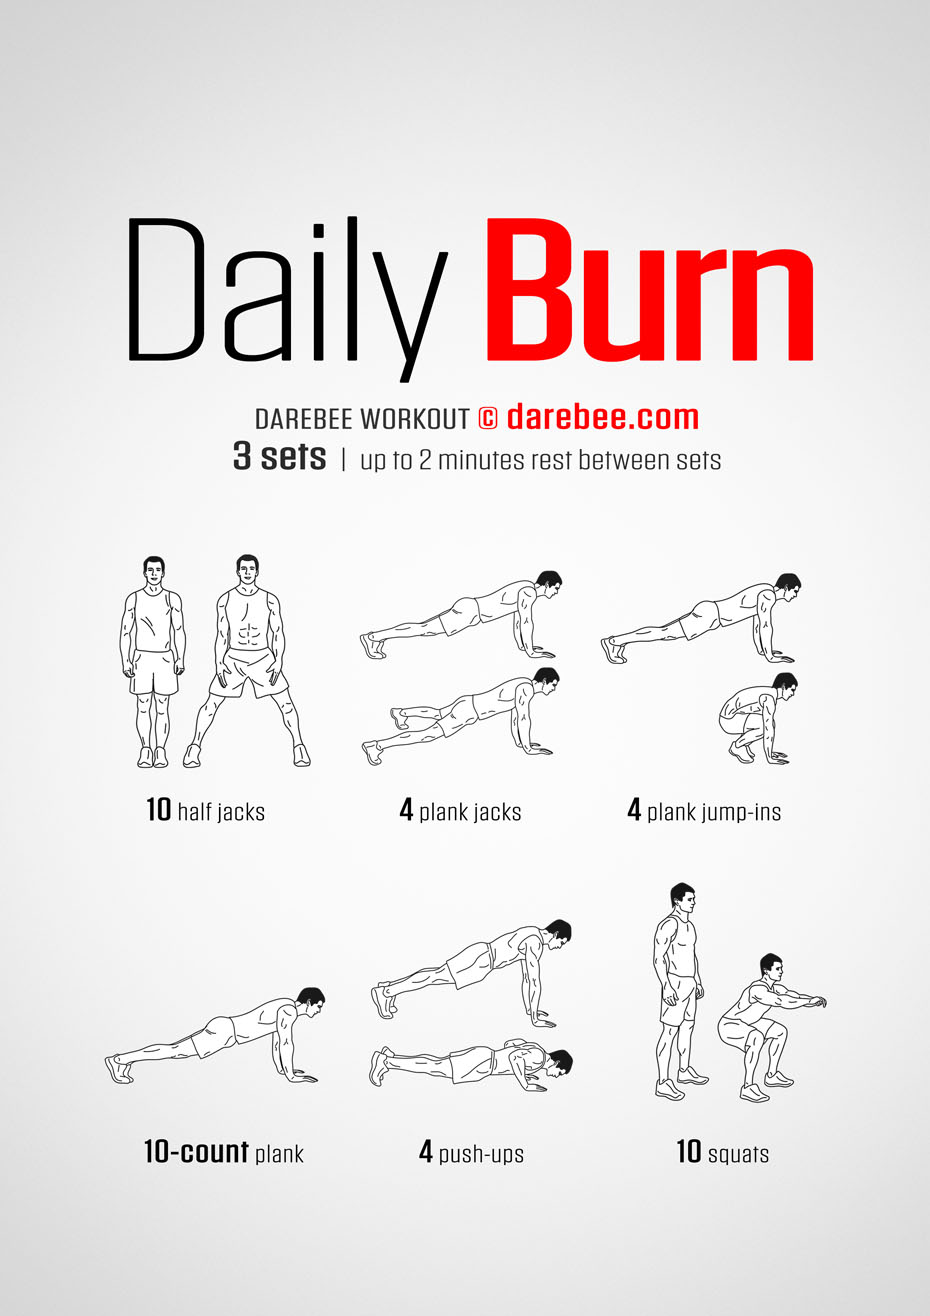 Daily Burn review: New daily workouts for beginners, but the music